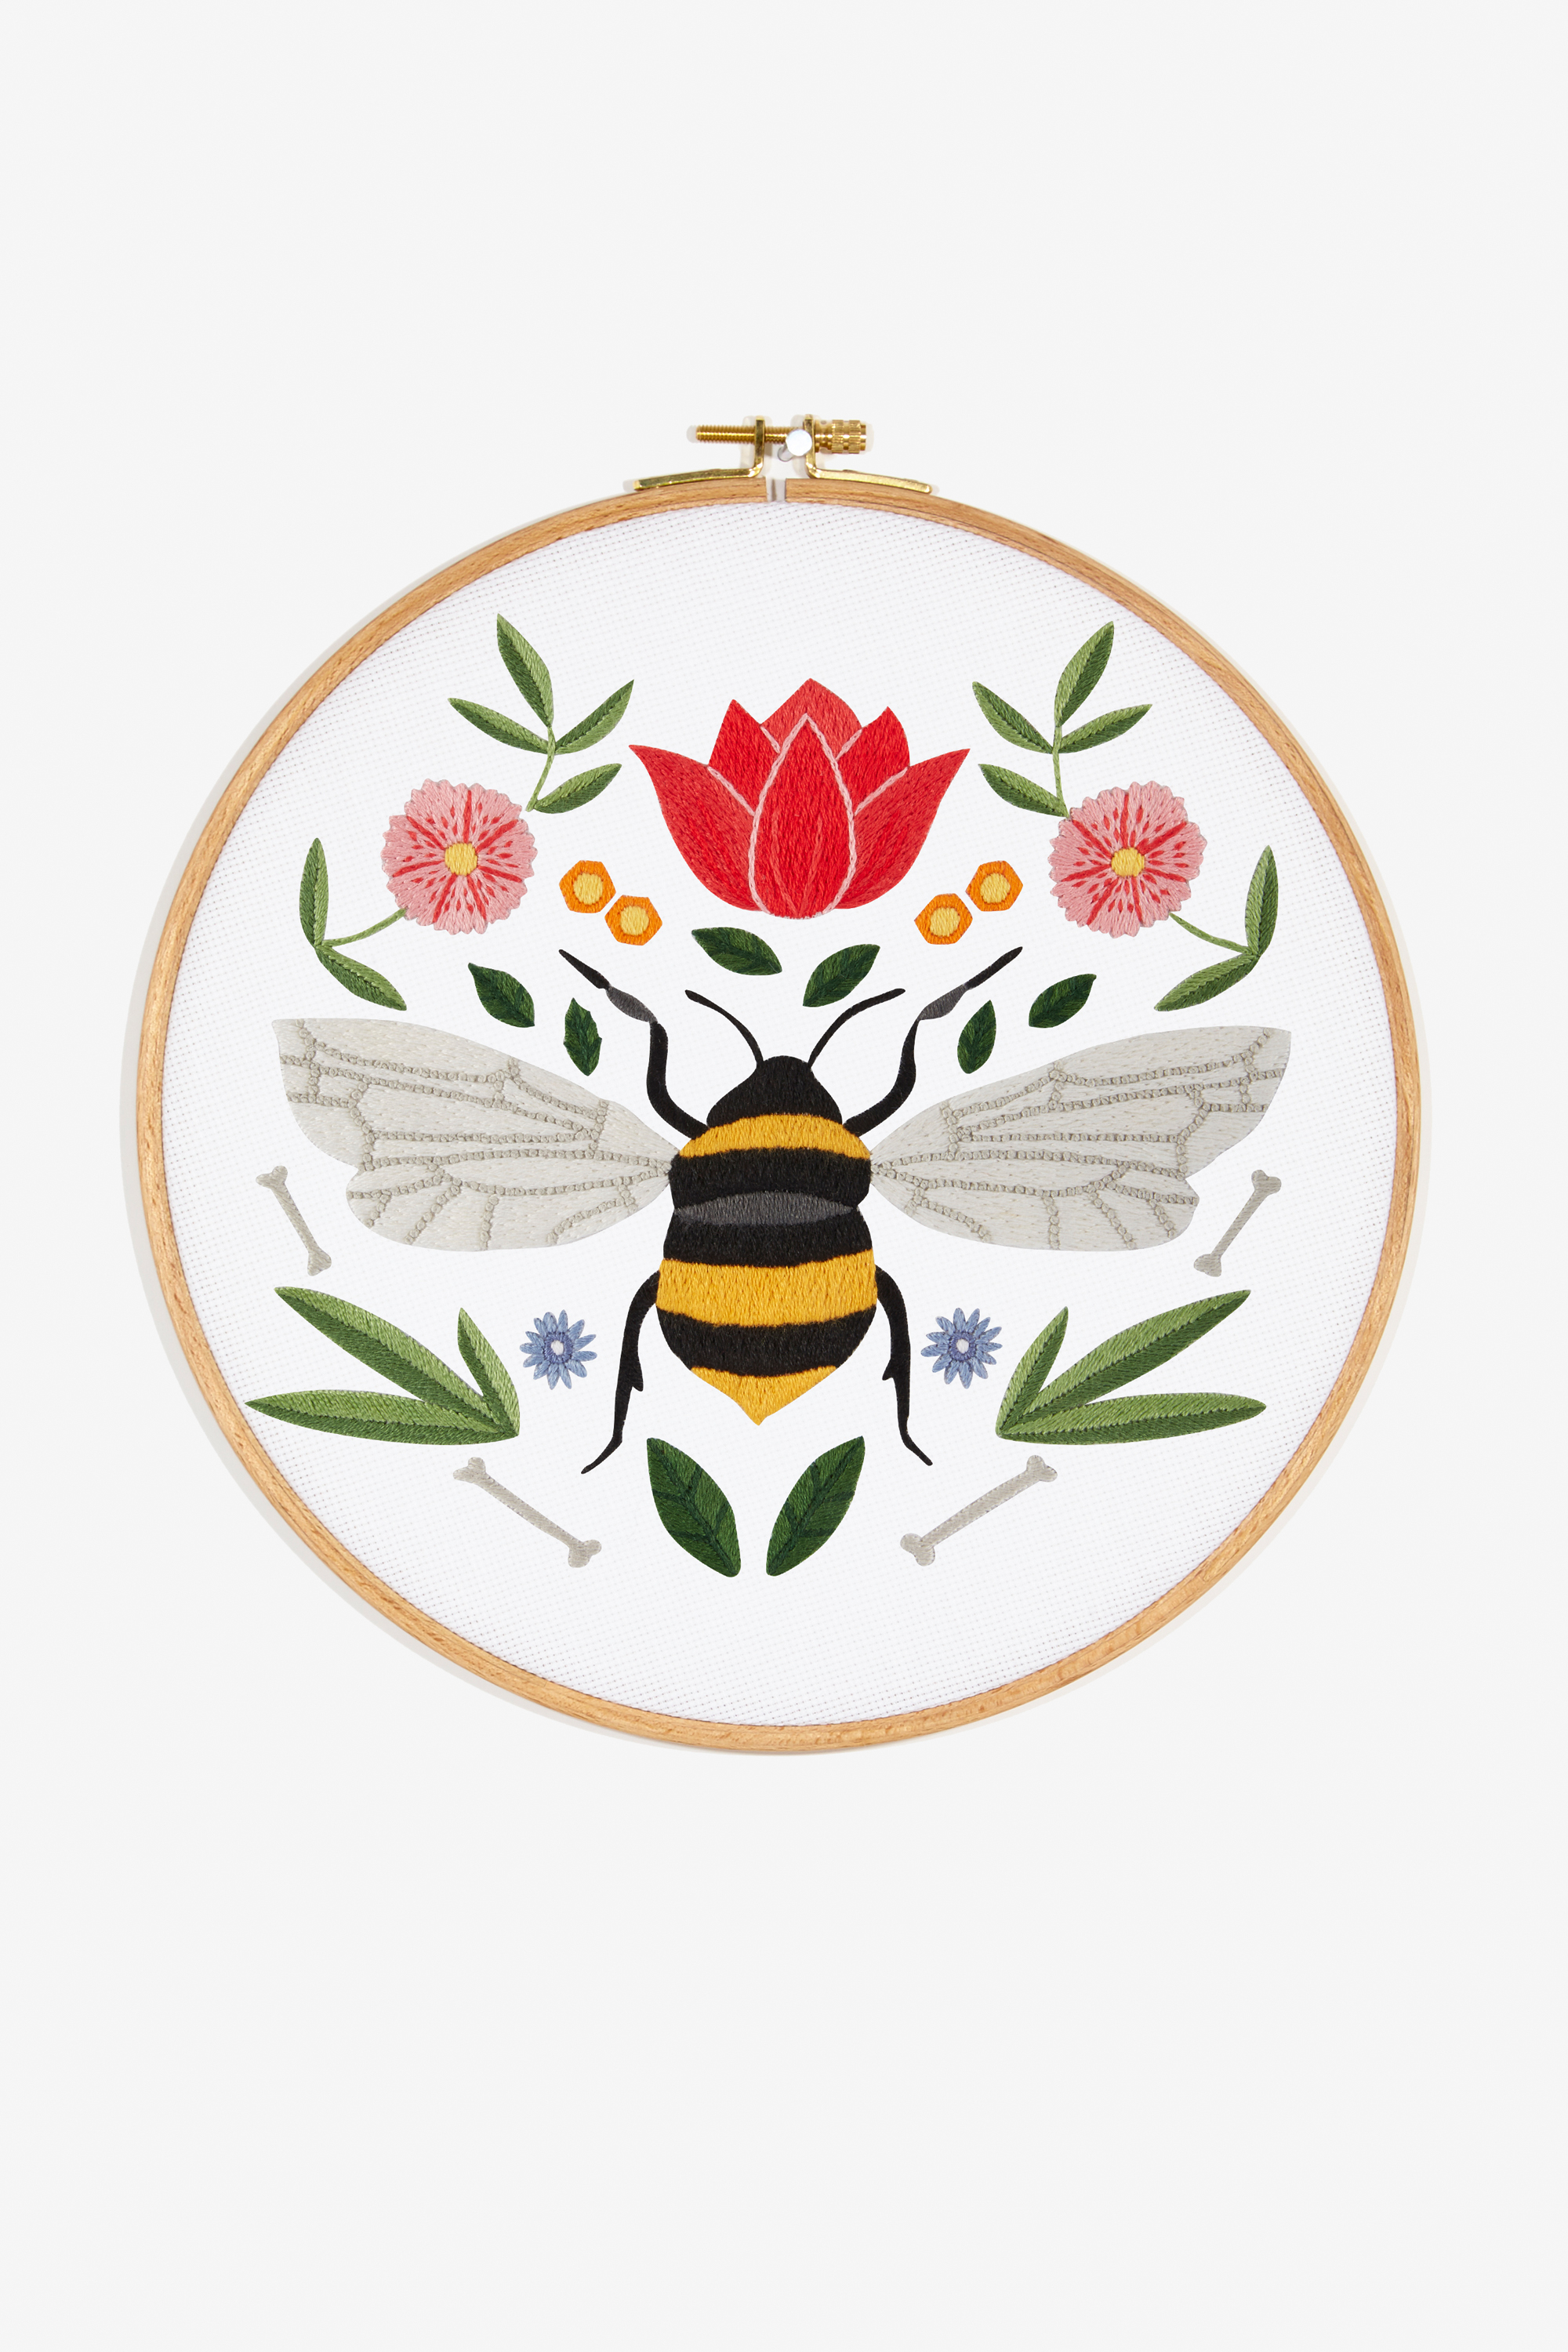 Bumble Bee Embroidery Pattern Bee Pattern Free Embroidery Patterns Dmc